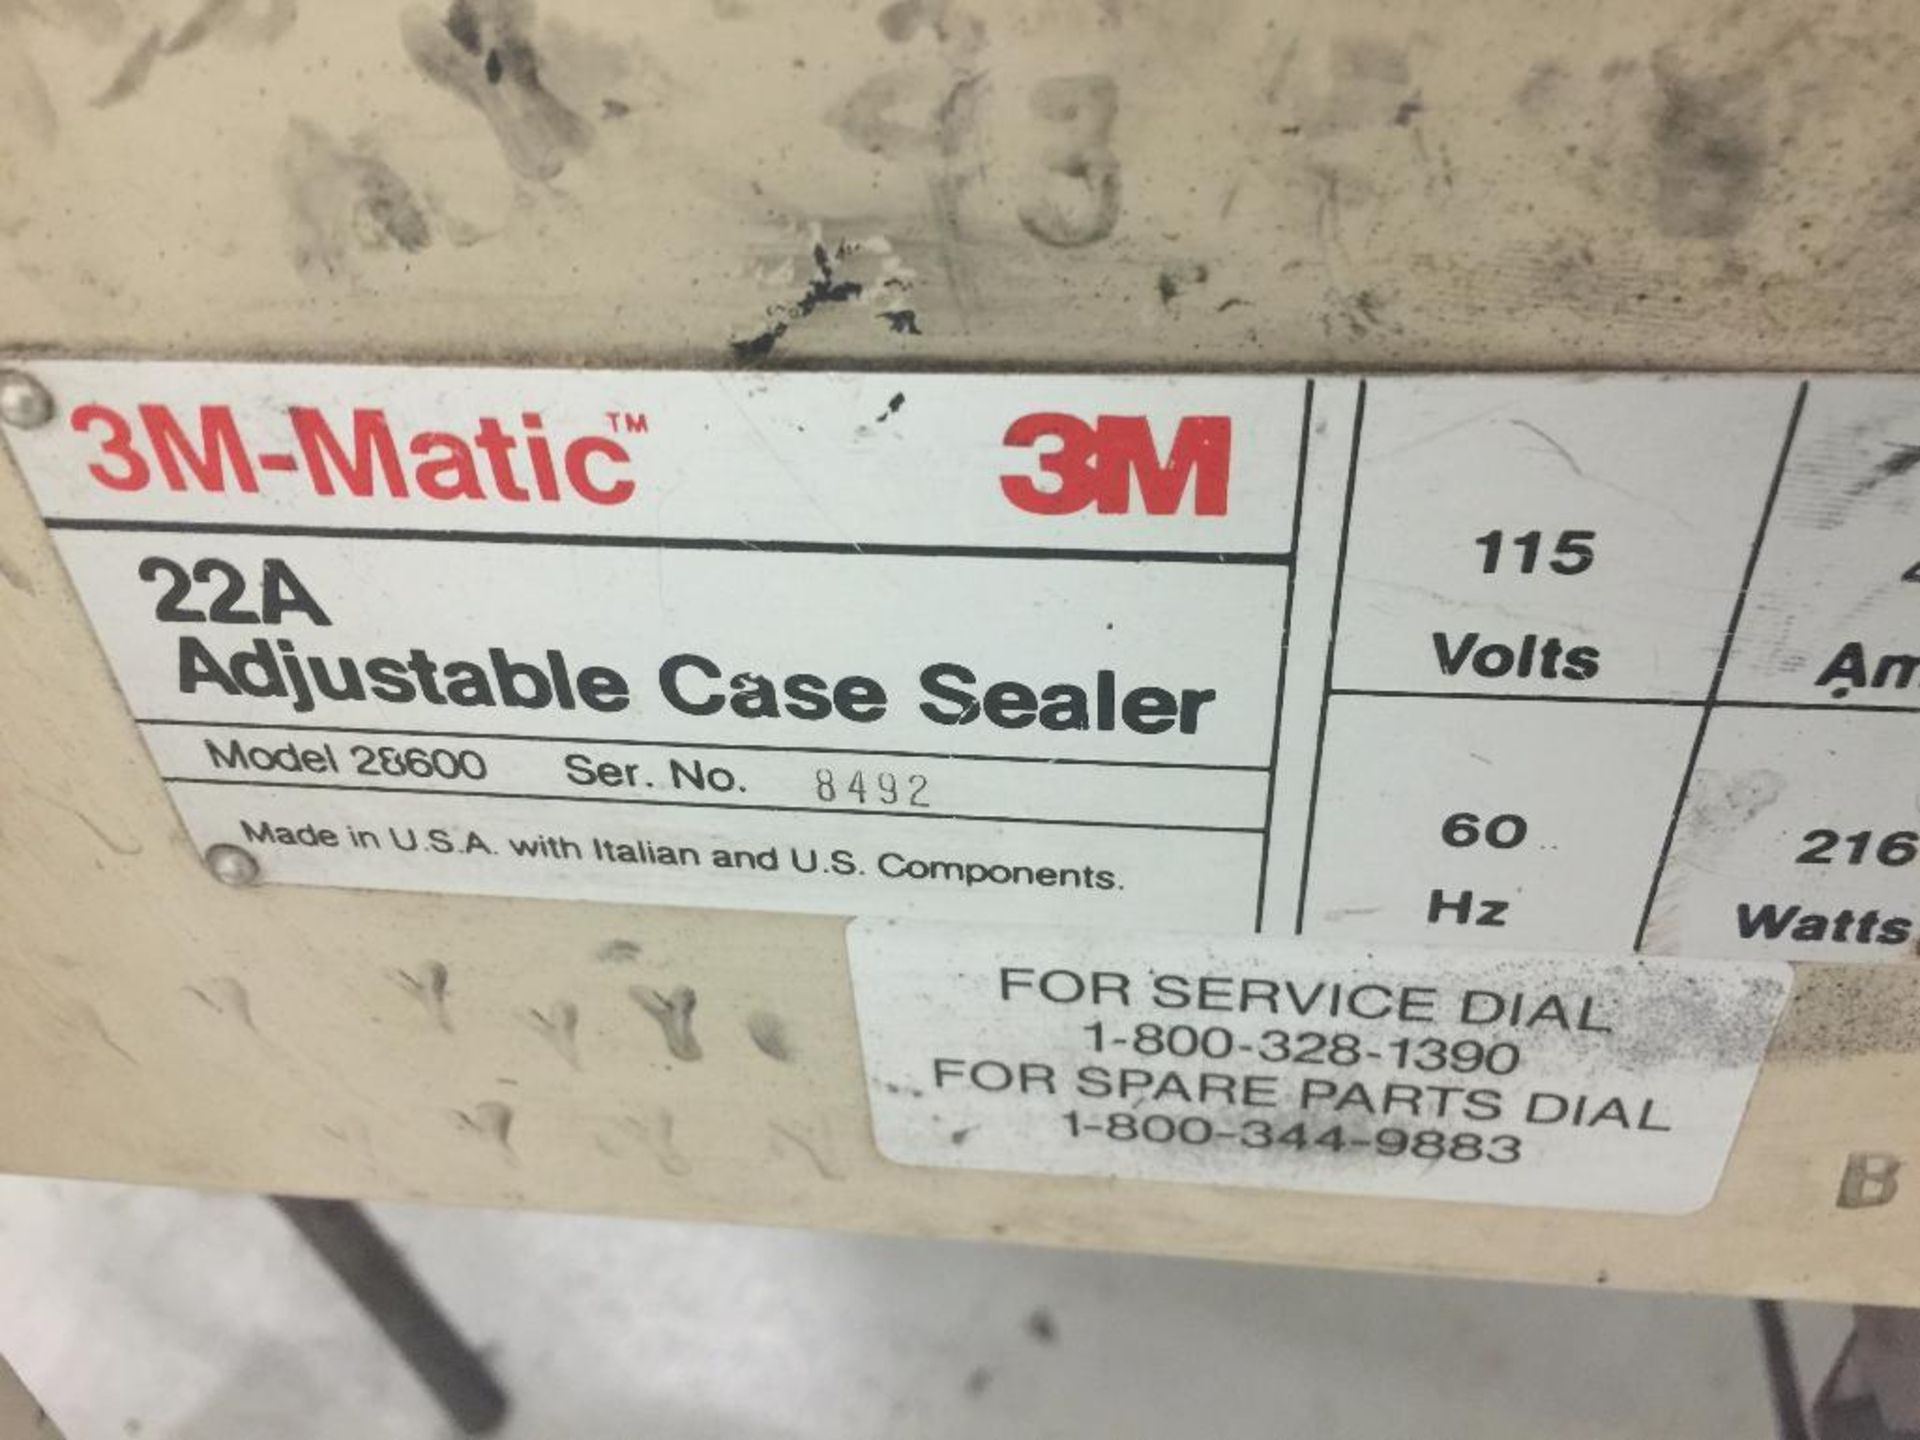 3M-Matic 22A adjustable case sealer, model 28600, s/n 8492, top and bottom tape heads. (TPR15) - ** - Image 4 of 4